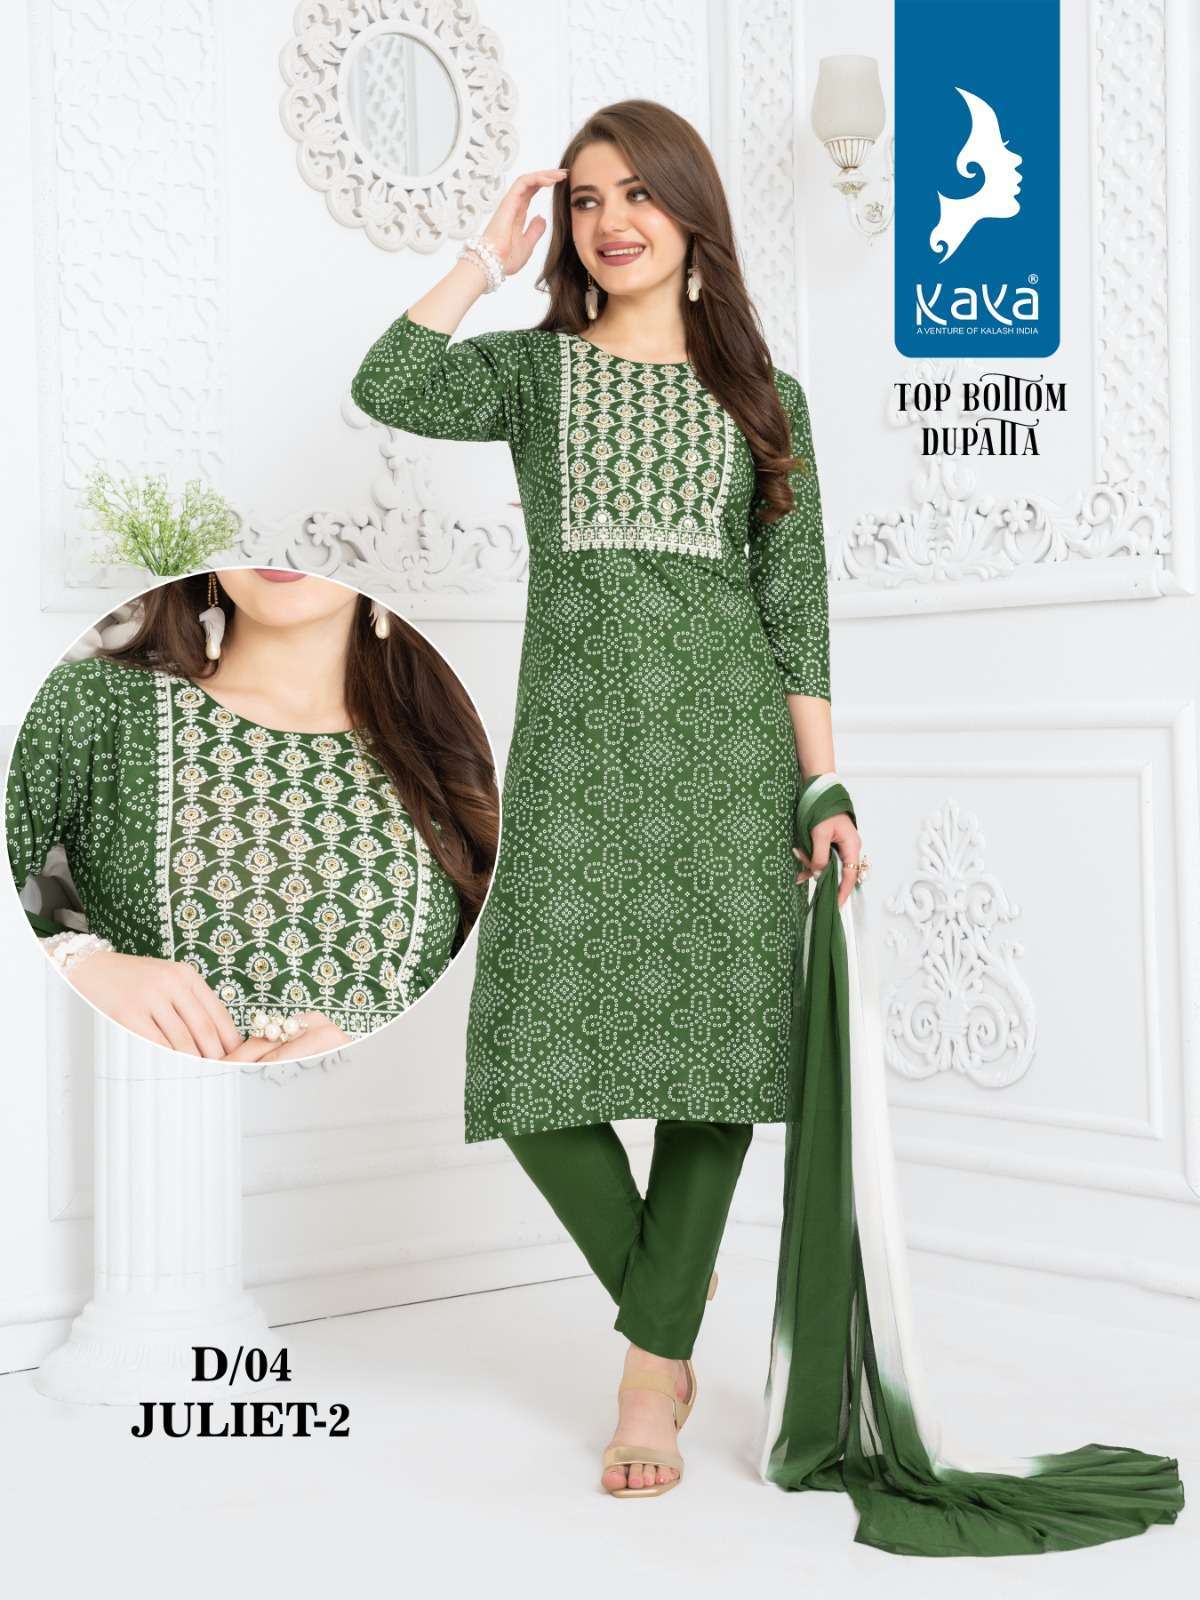 Buy Ethnic Wear & Sarees for Women Online at Best Prices - Yes!poho | Kurta  palazzo, Anarkali dress, Indian ethnic wear